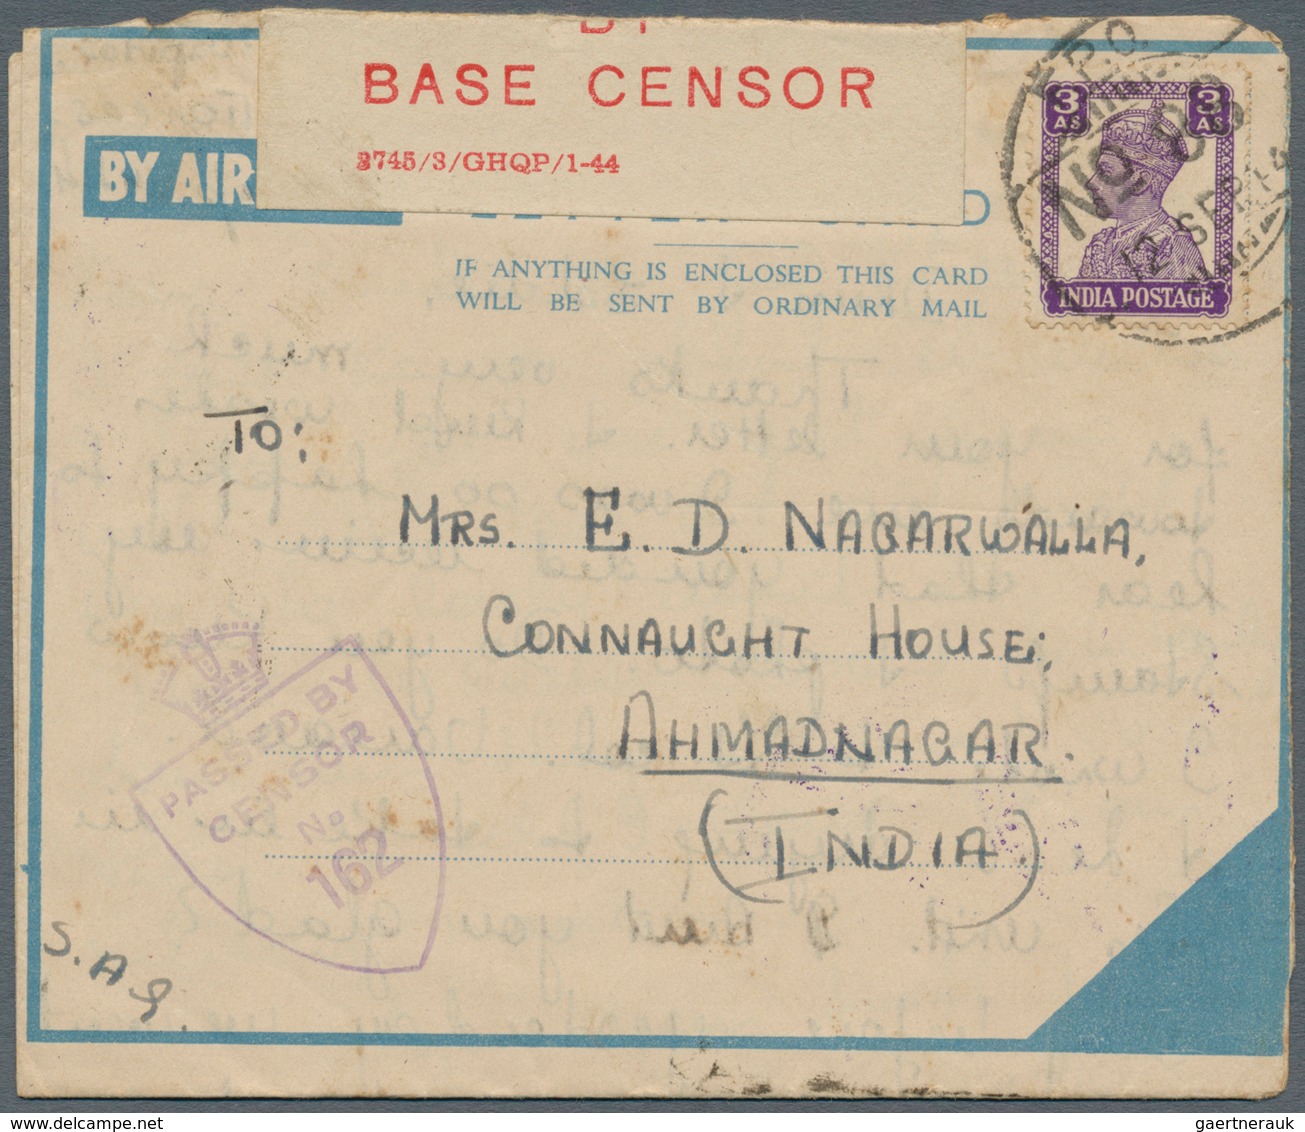 08780 Indien - Feldpost: 1944 (12 Sep) SAIDA, Lebanon: 'Blue Ribbon' Air Mail Letter Card Used From Indian - Franchise Militaire